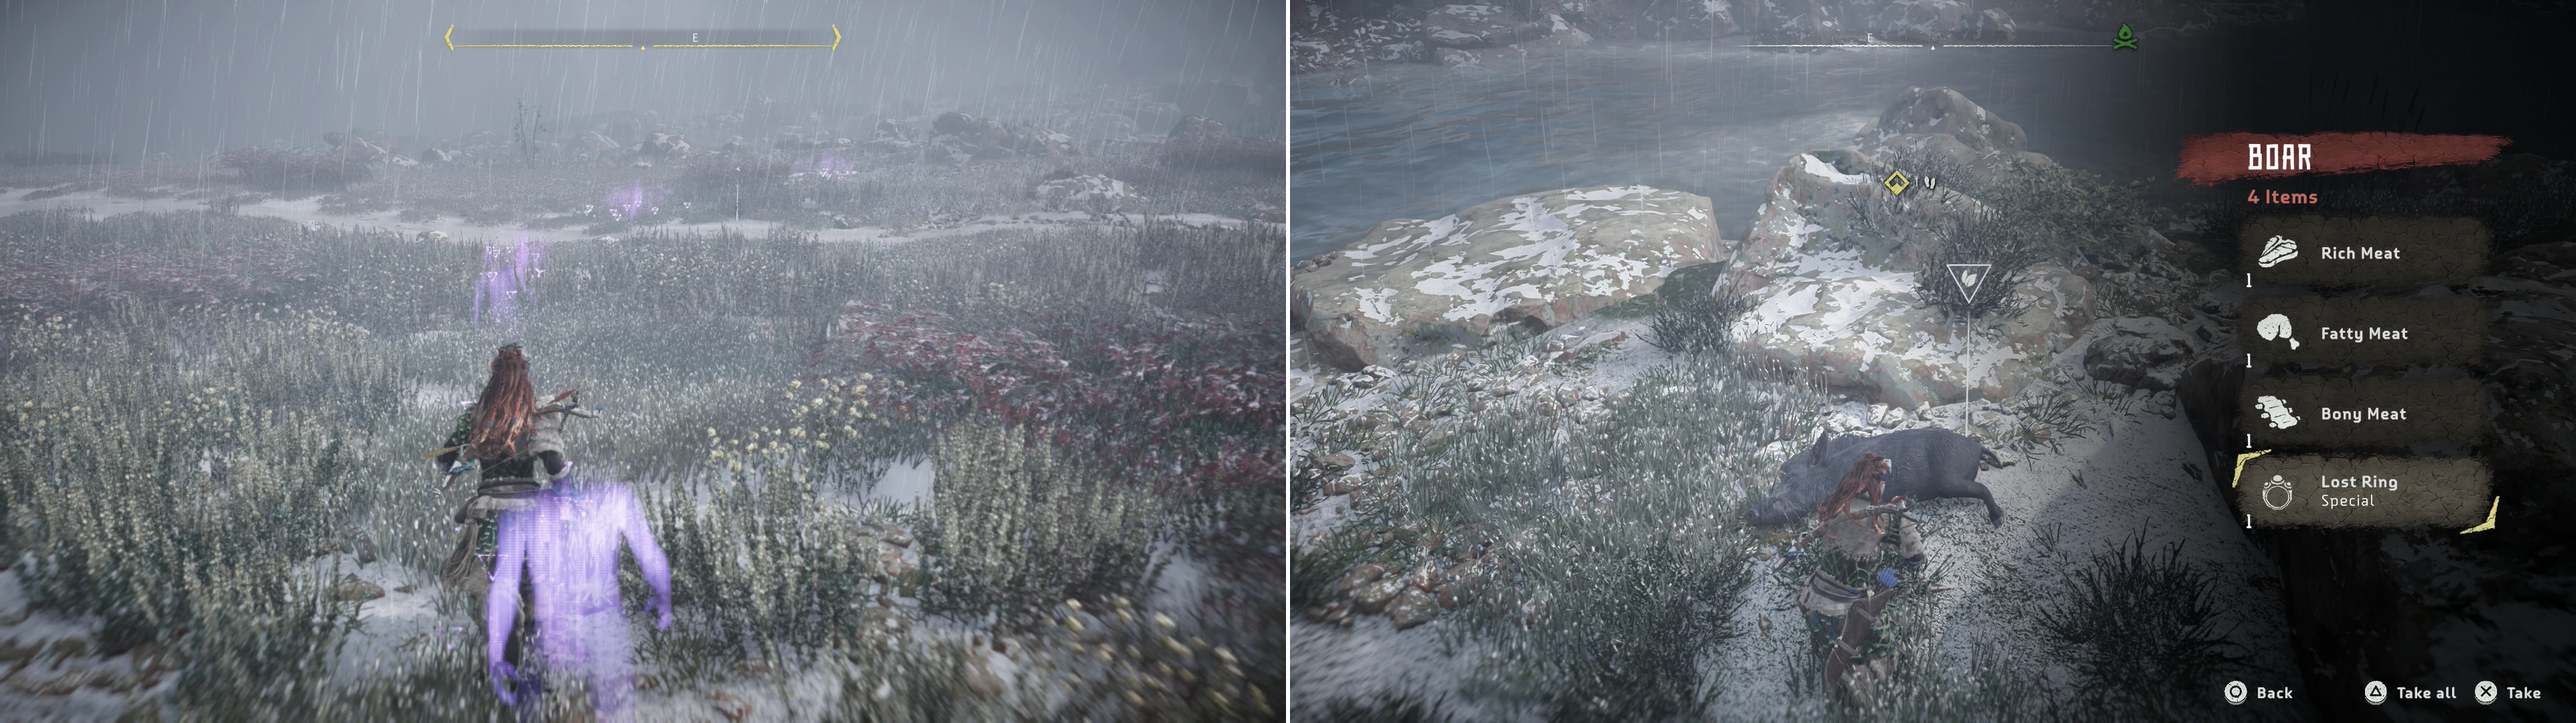 Track Taim’s past movements (left) to find a dead Boar, inside of which youll find Taim’s Lost Ring (right).